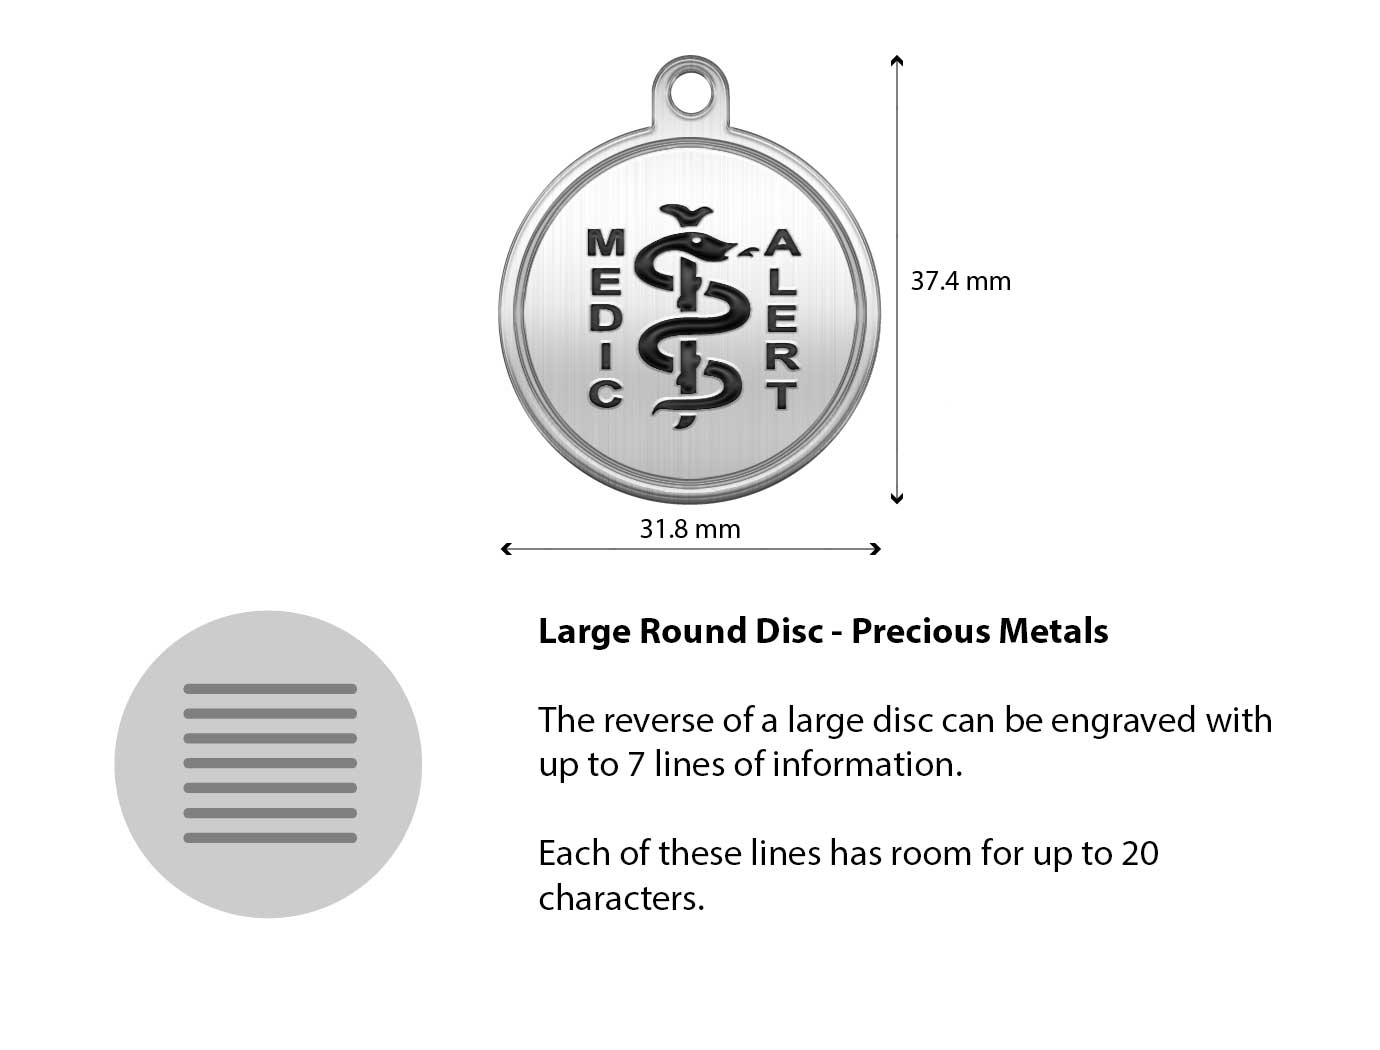 Diagram of the MedicAlert precious metal large round disc with measurements and descriptions of the engraving specifications